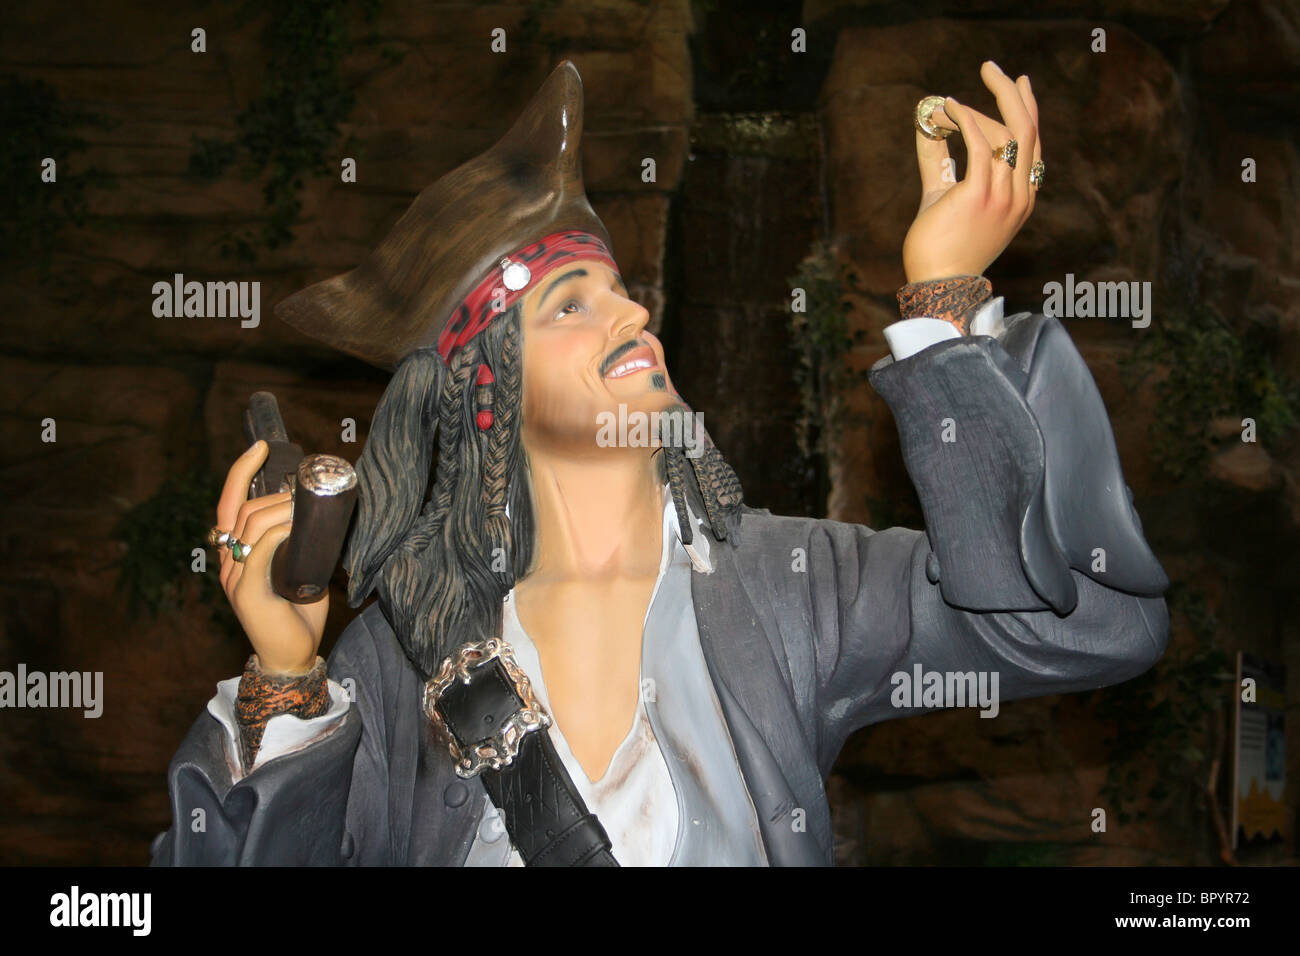 Model Of A Pirate Holding Gold Treasure Coin Stock Photo